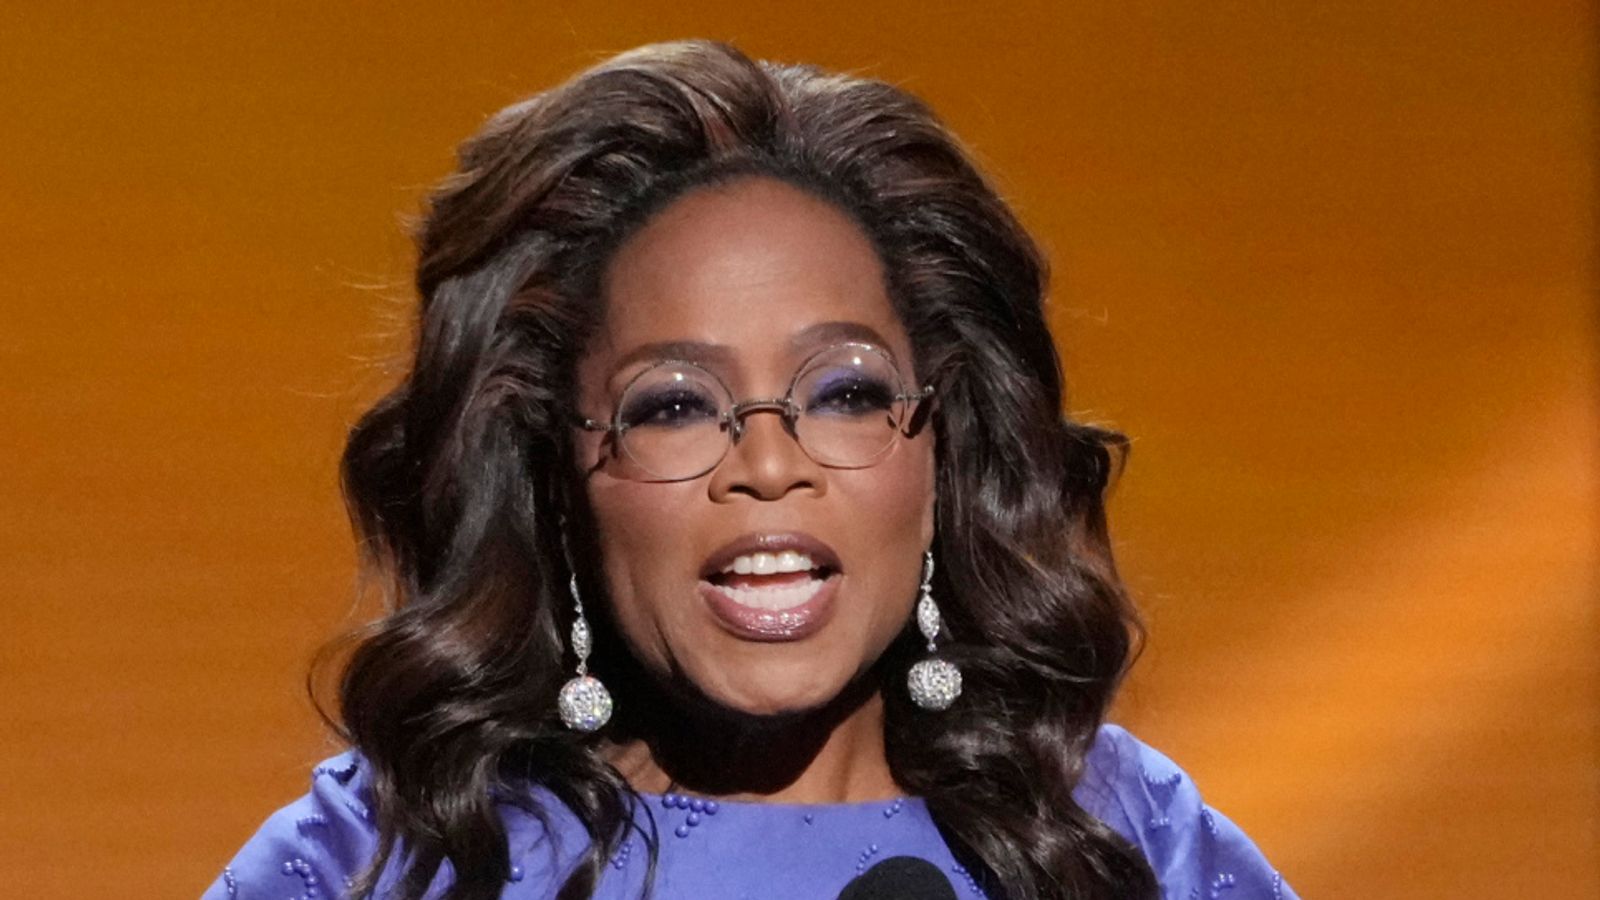 Oprah Winfrey speaks of 'biggest regret' as she opens up about weight loss struggles